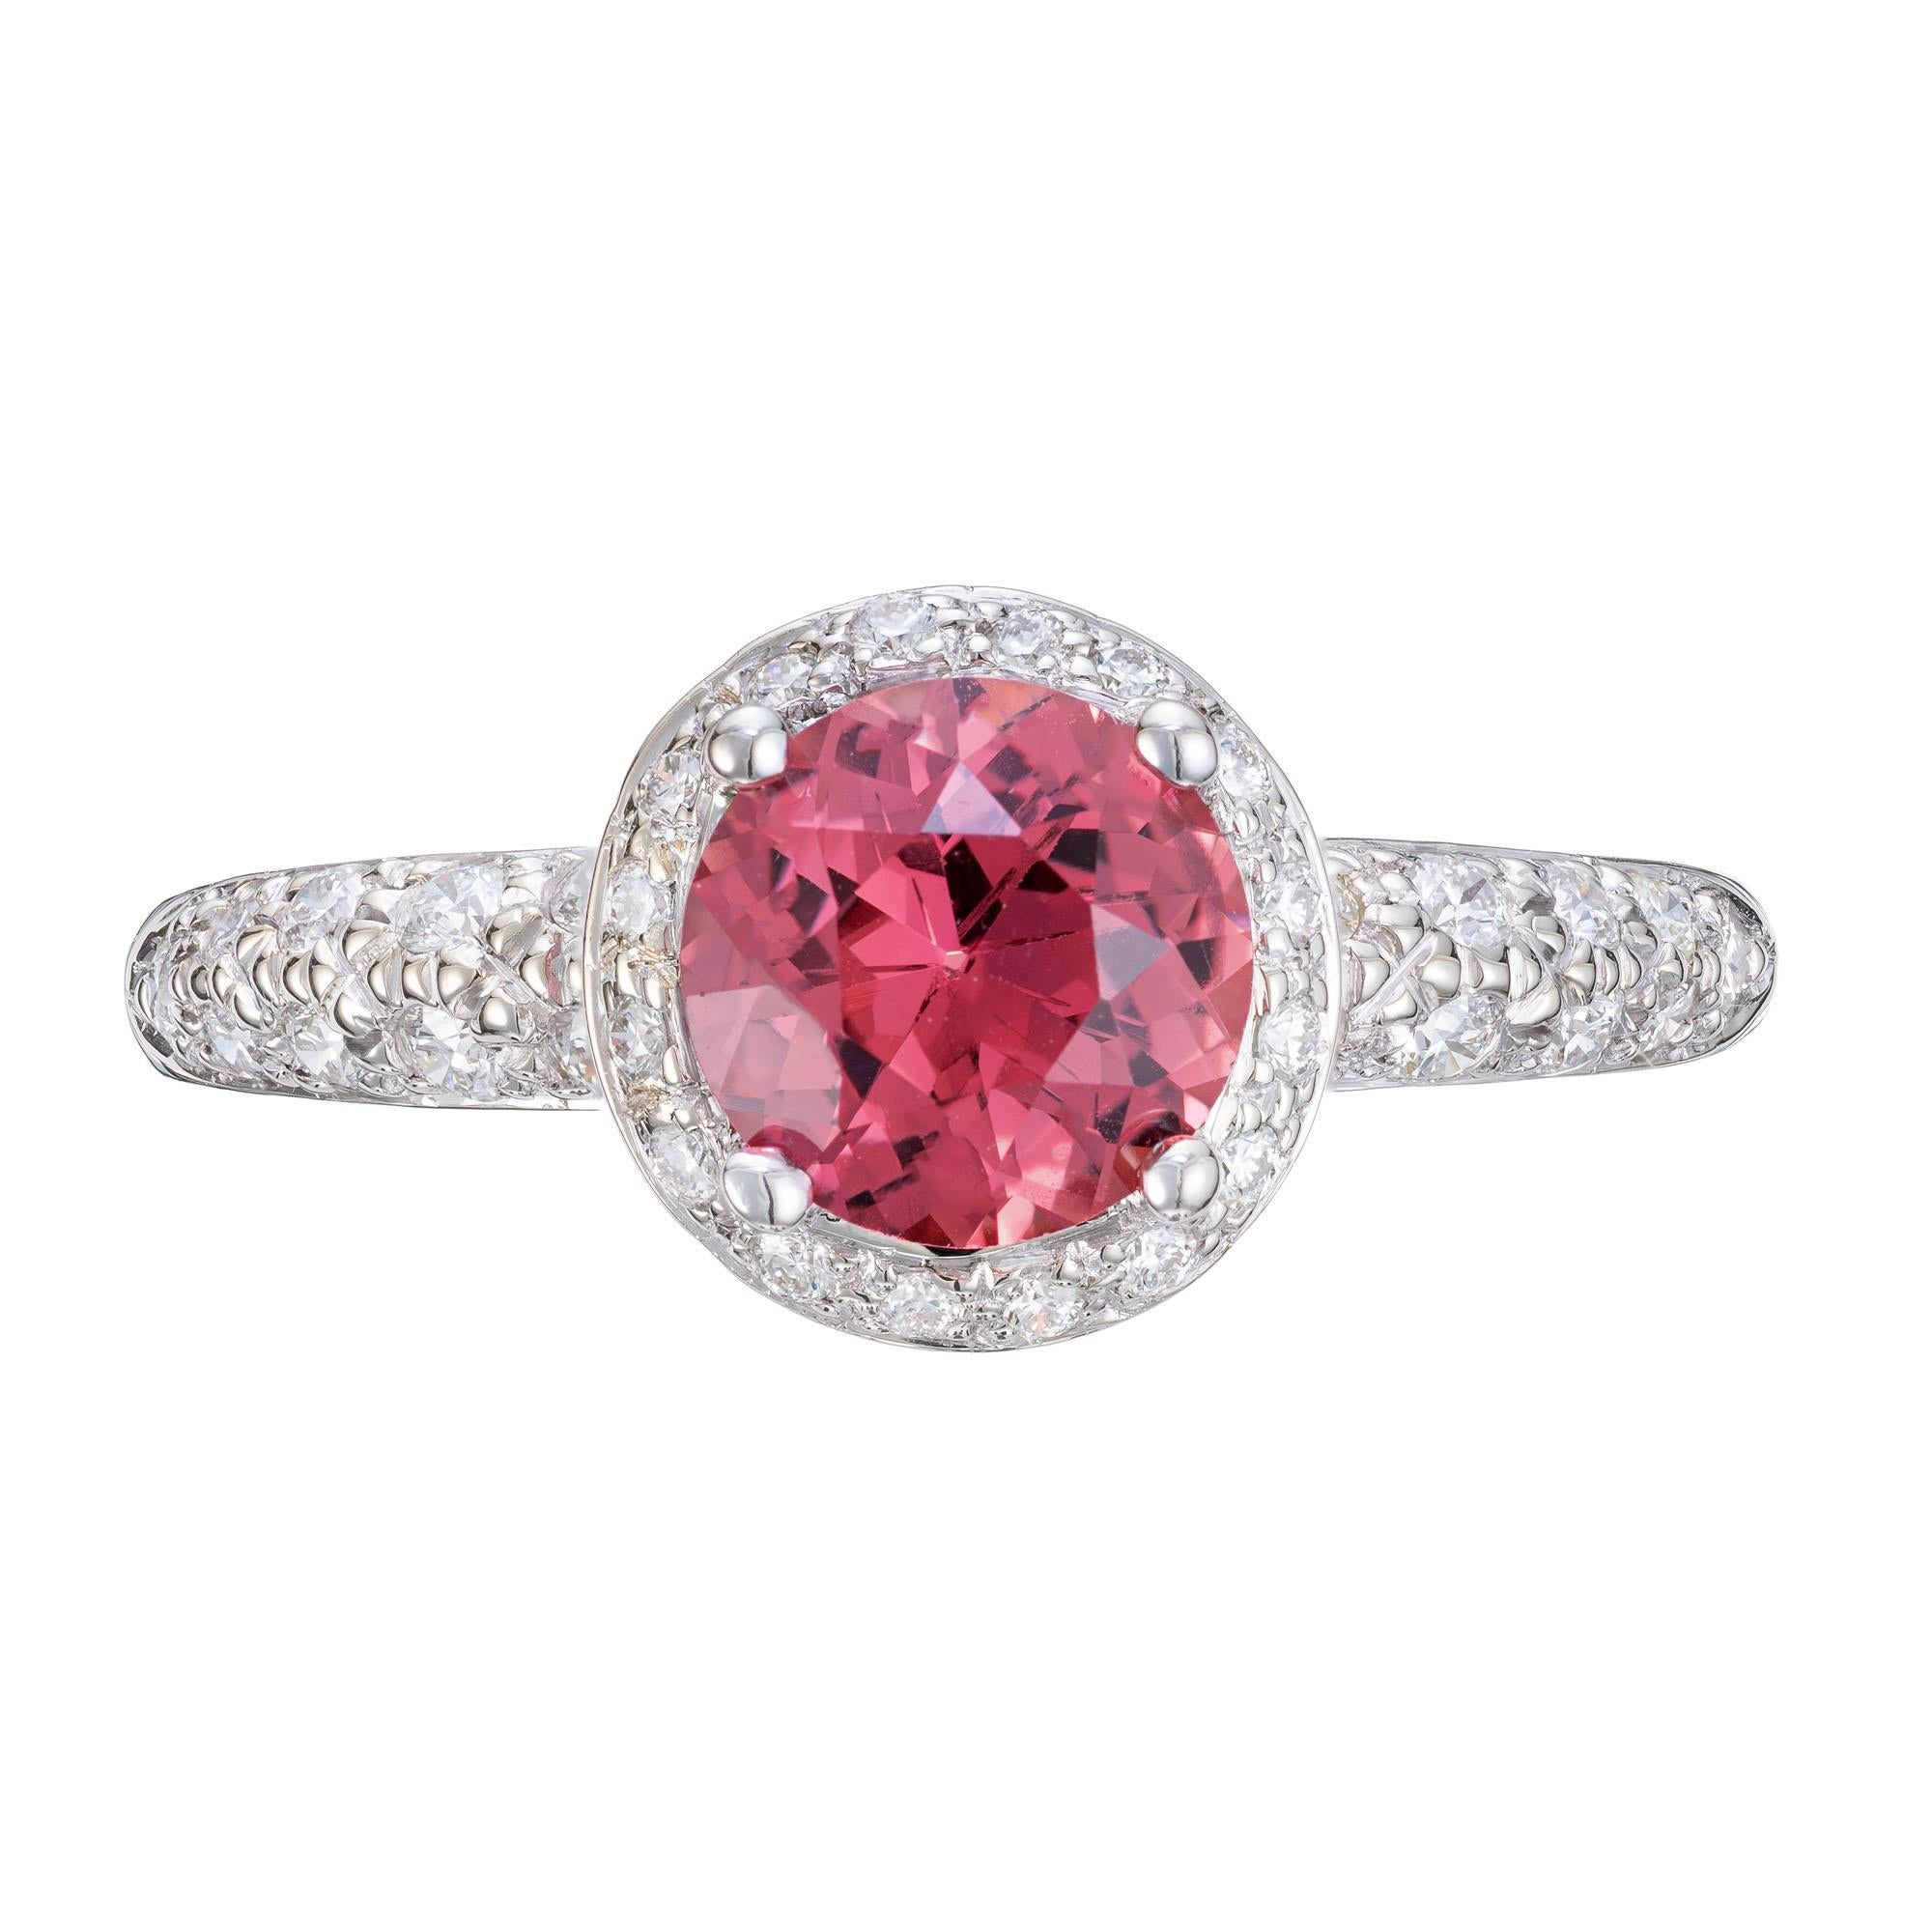 Krementz sapphire and diamond engagement ring. GIA certified natural 1.37ct pink Sapphire center stone set in a 18k white gold setting with a halo of round diamonds and diamonds along the both shoulders. The ring is from the Richard Krementz